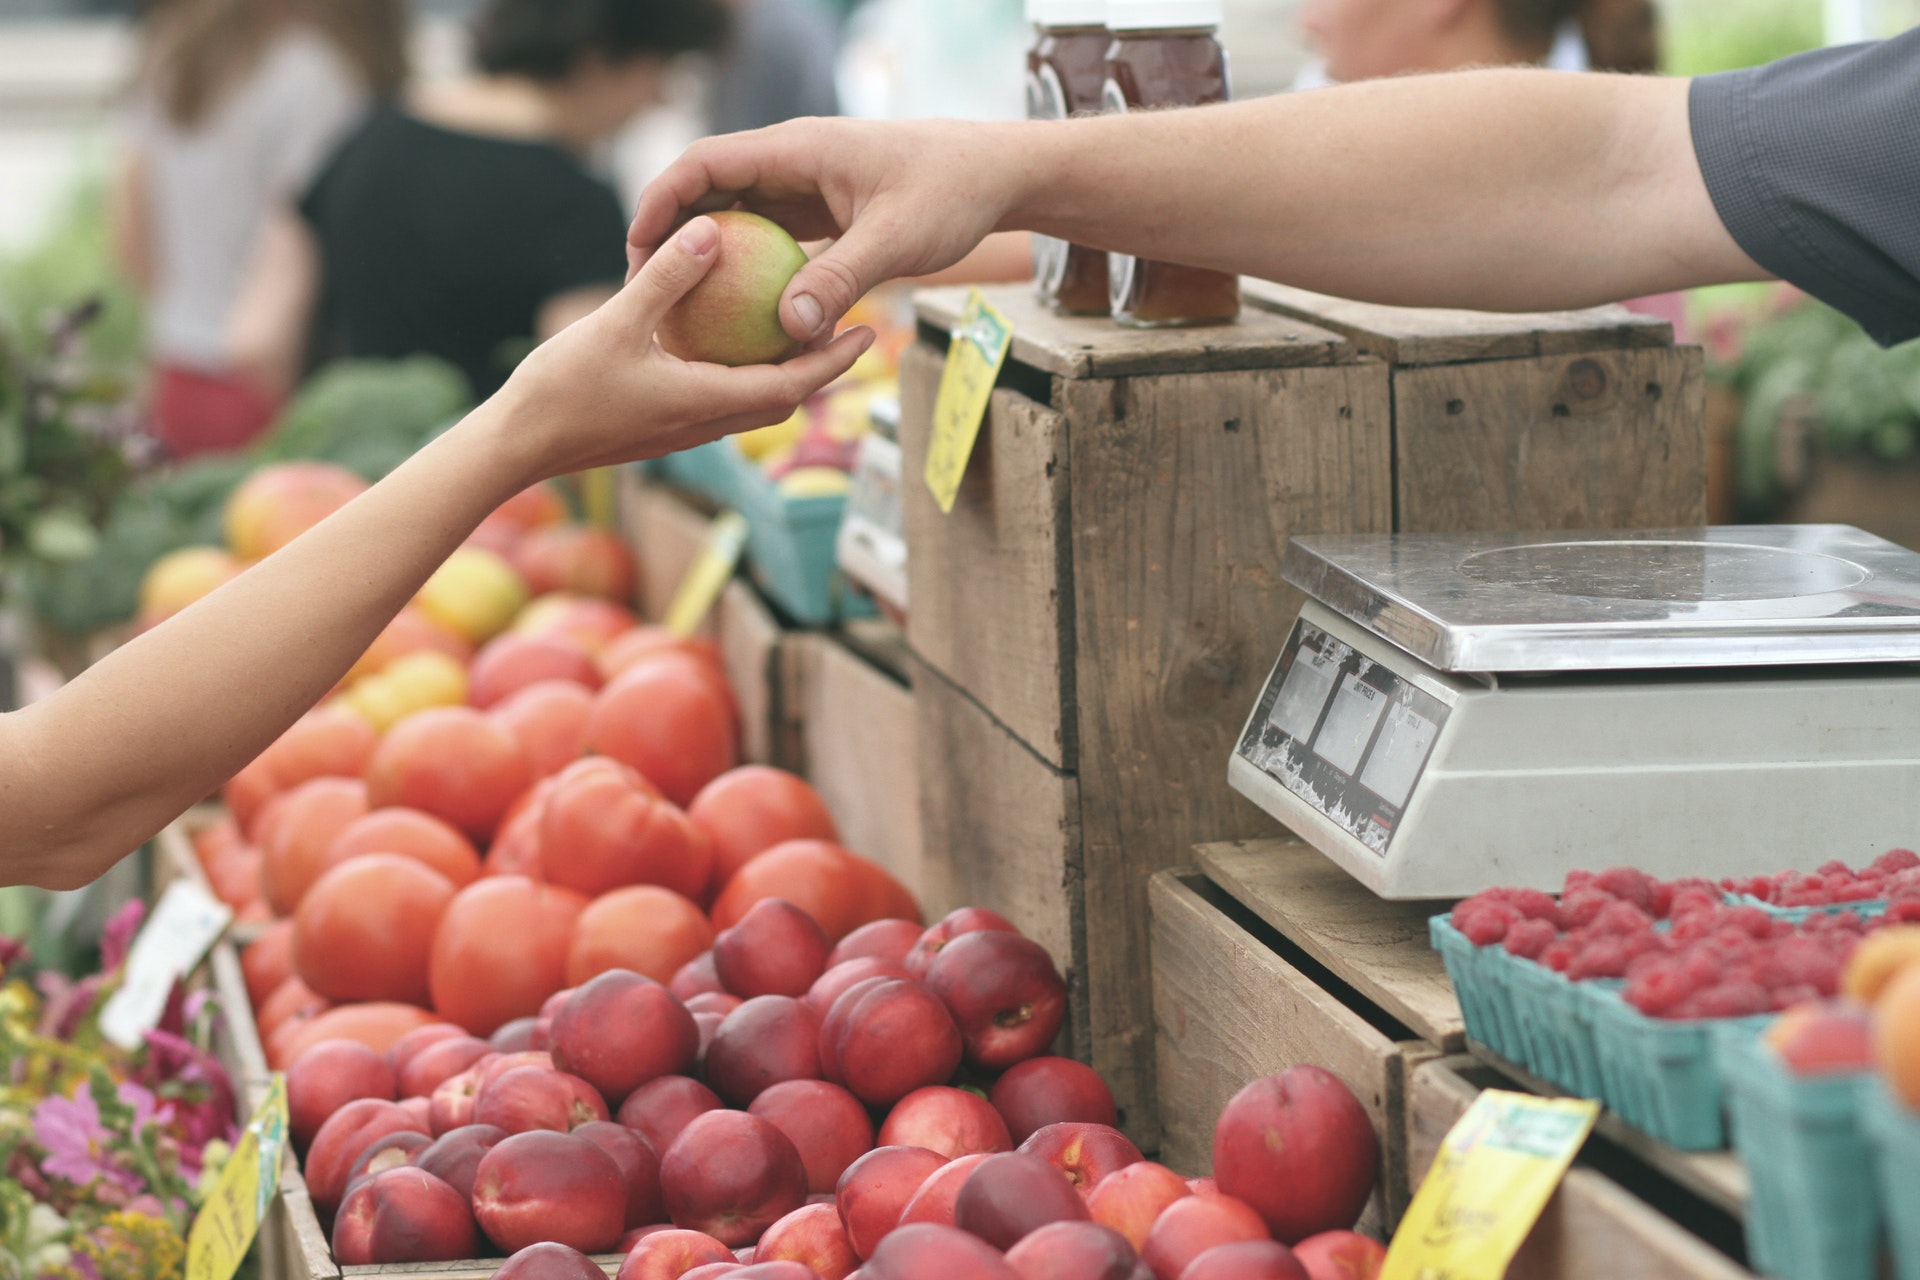 Two hands hovering over a large assortment of Apples and Tomatoes. You can see the hands exchanging an apple.